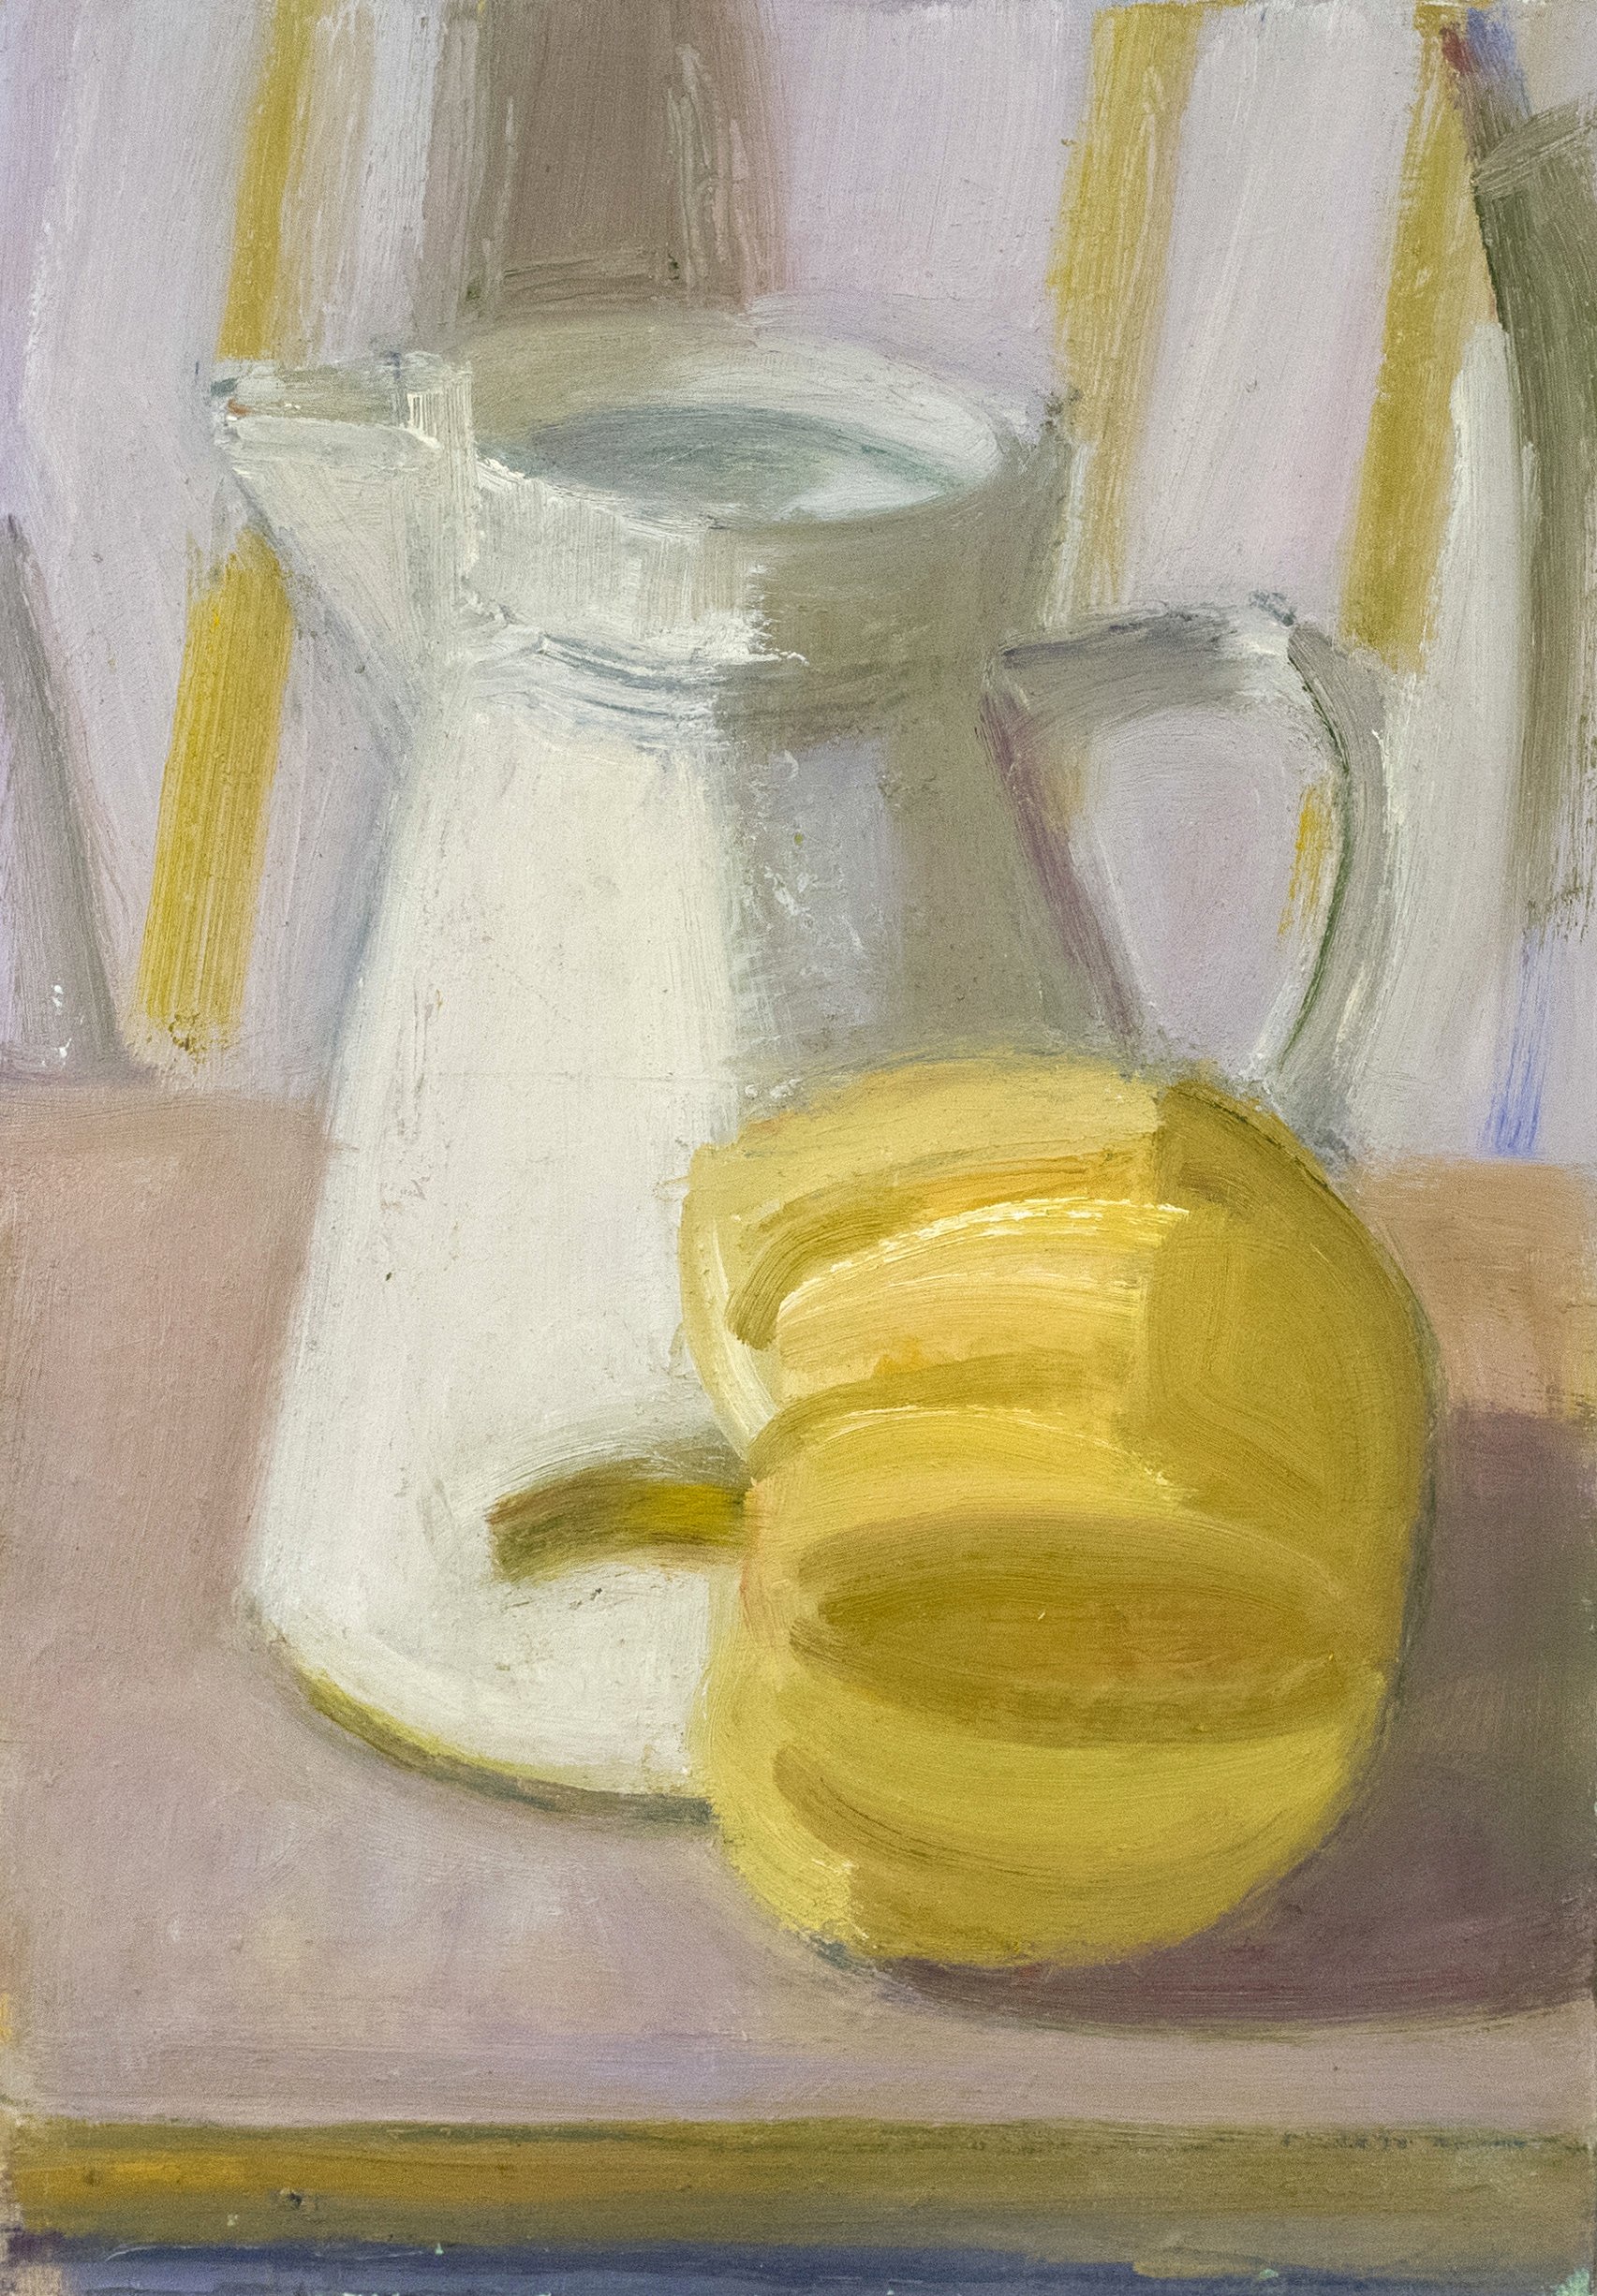   Pitcher and Squash , c. 2006, oil/panel, 10 x 7 in. (Private collection) 